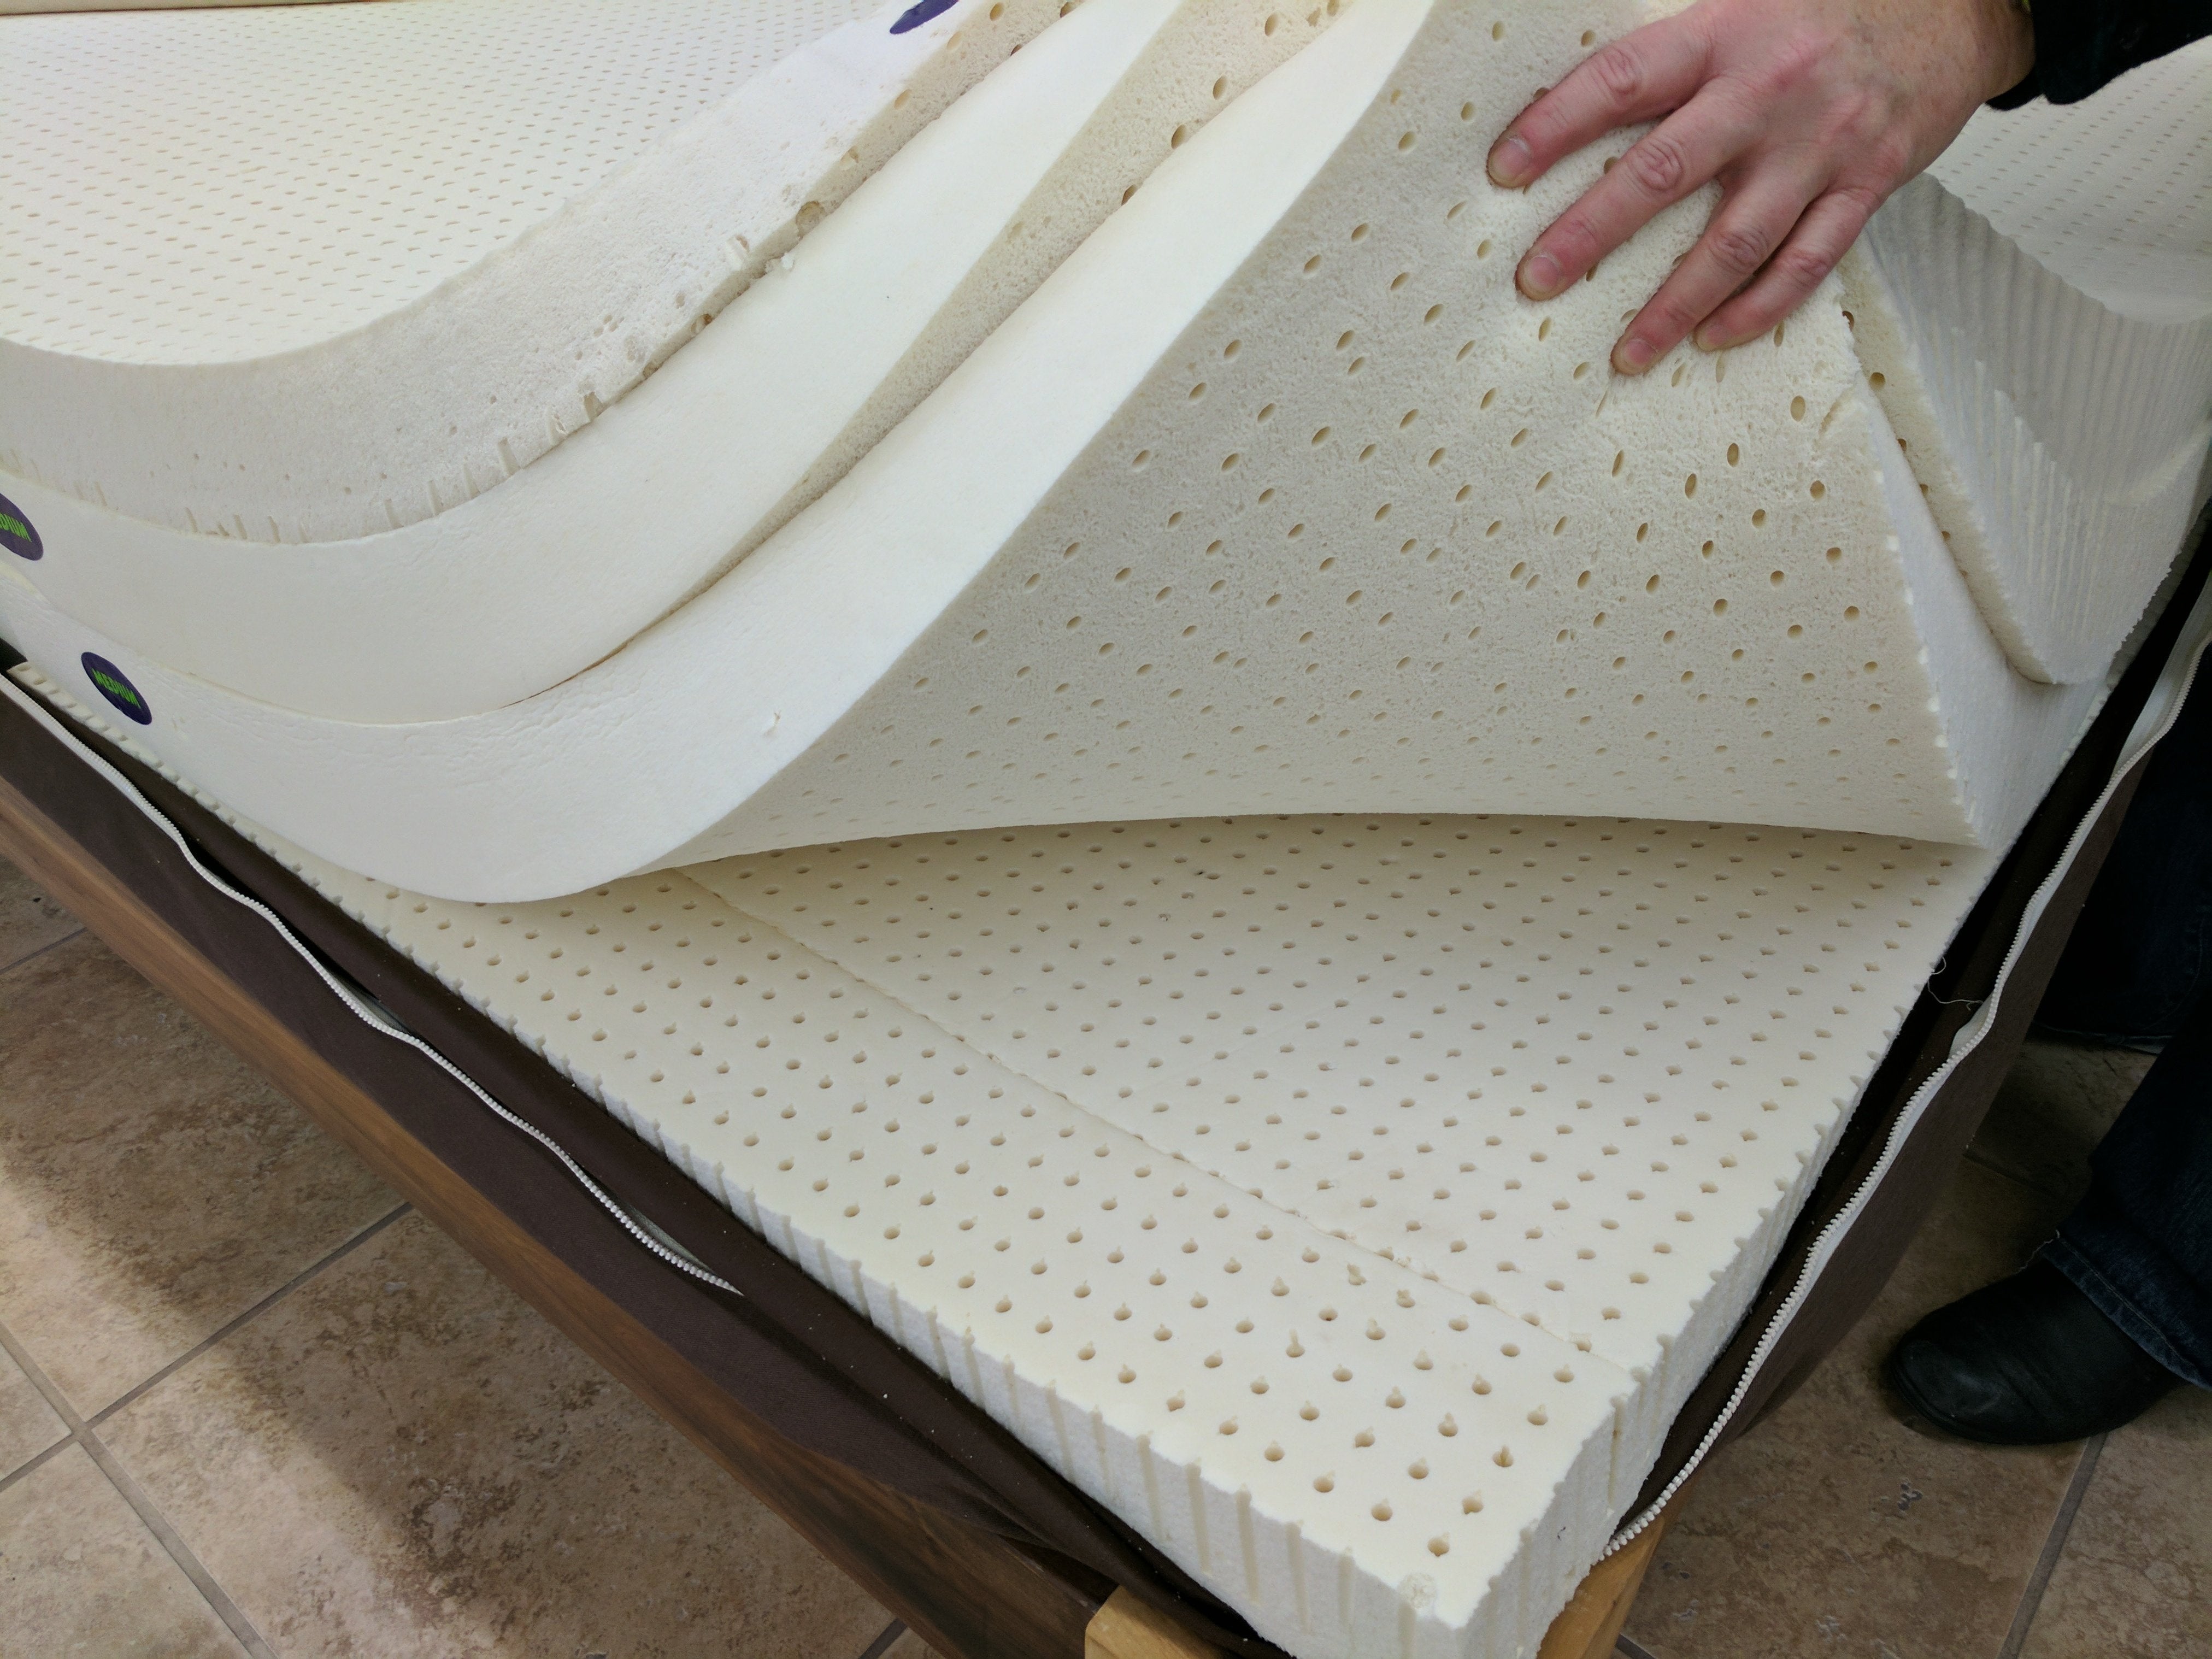 '- Organic Voyager 3-Layer Mattress layers can be easily moved around to make it firmer or softer on each side in Queen, King, and Cal-King sizes, providing you the ultimate in sleep-surface customization.